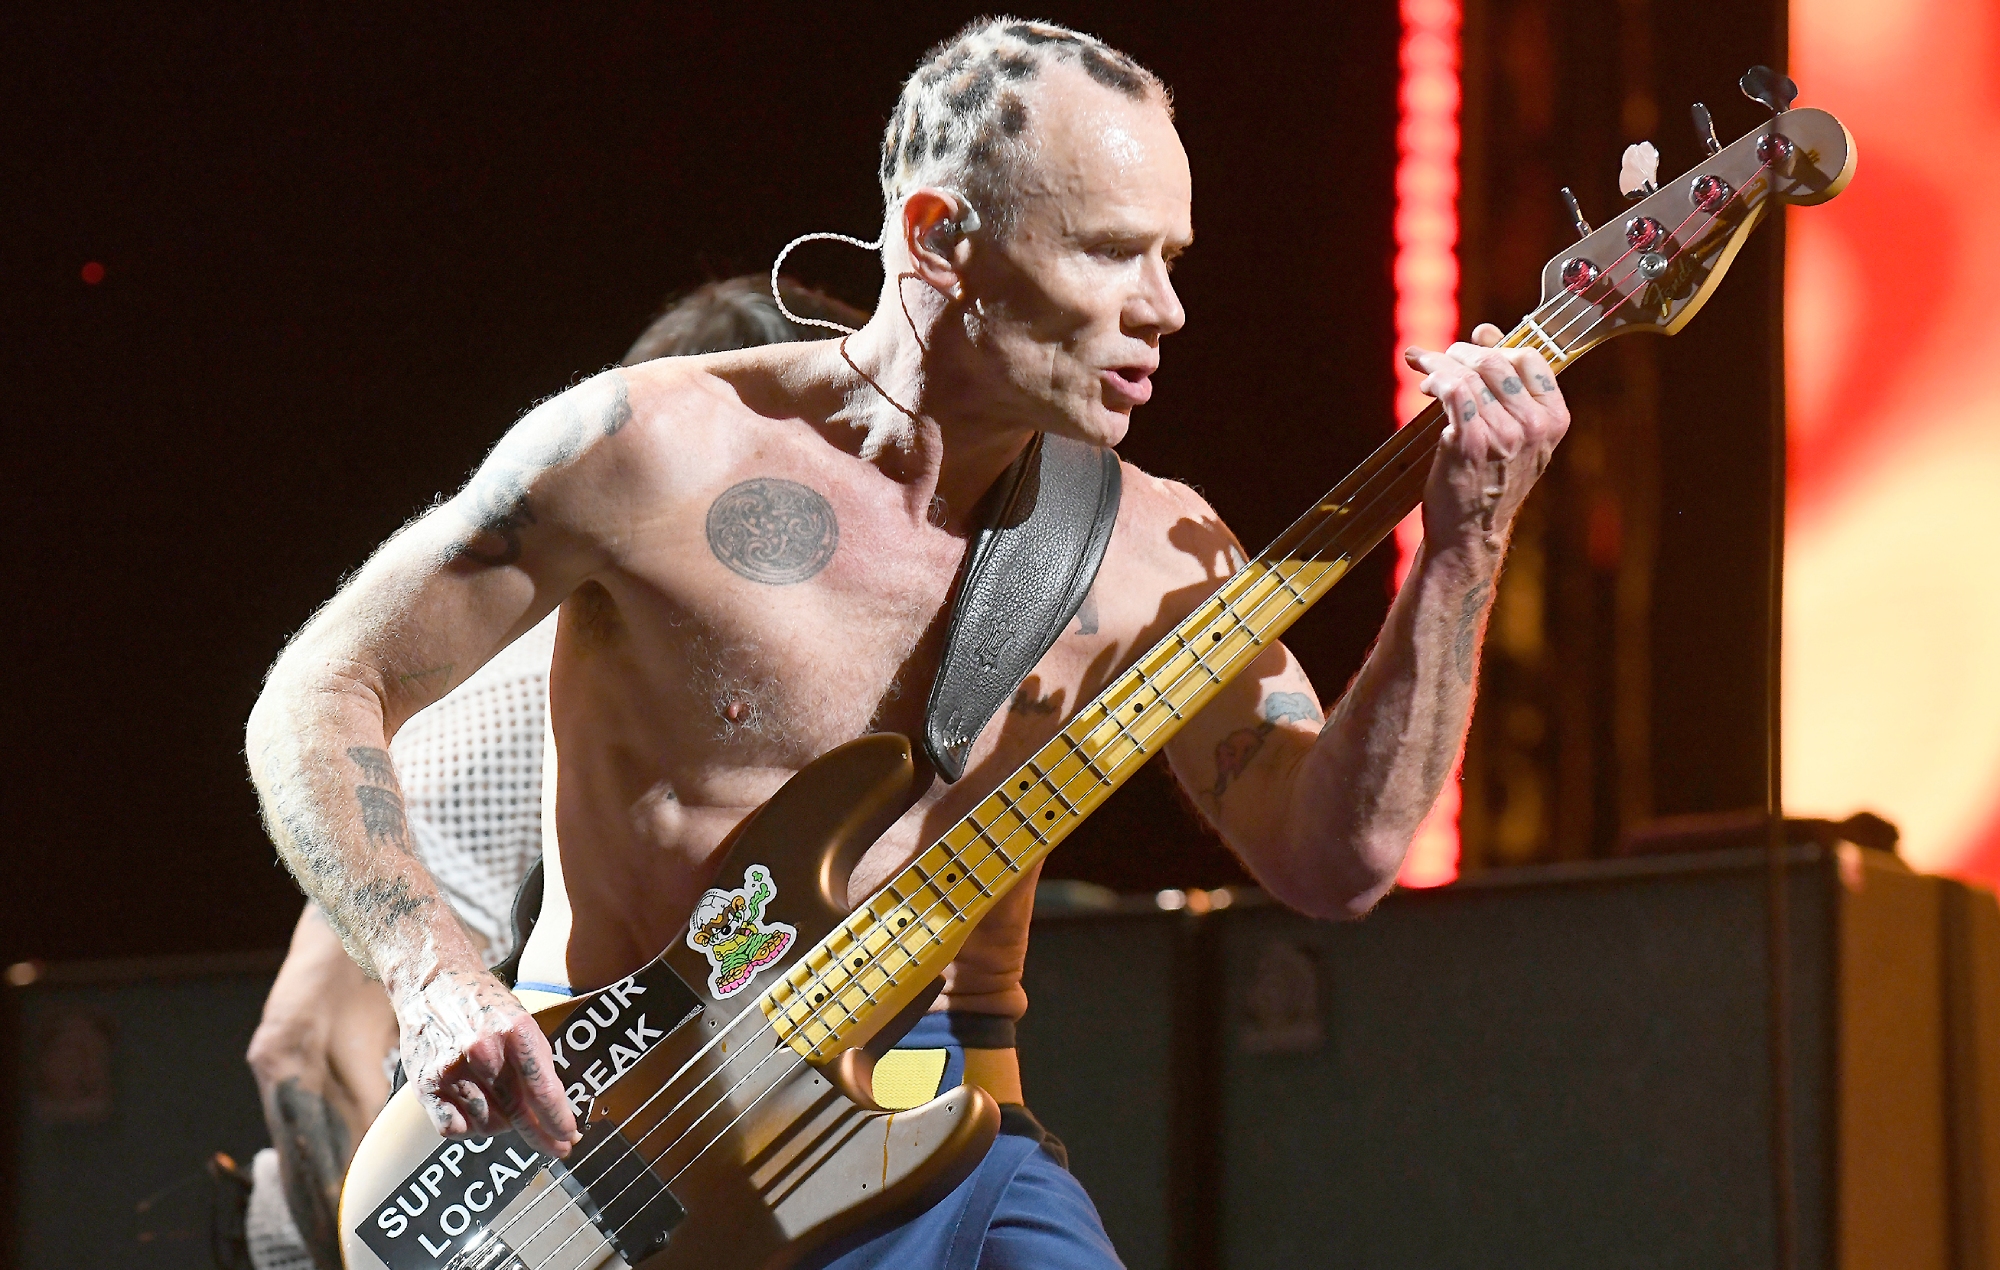 Flea reveals his most on-stage painful injuries